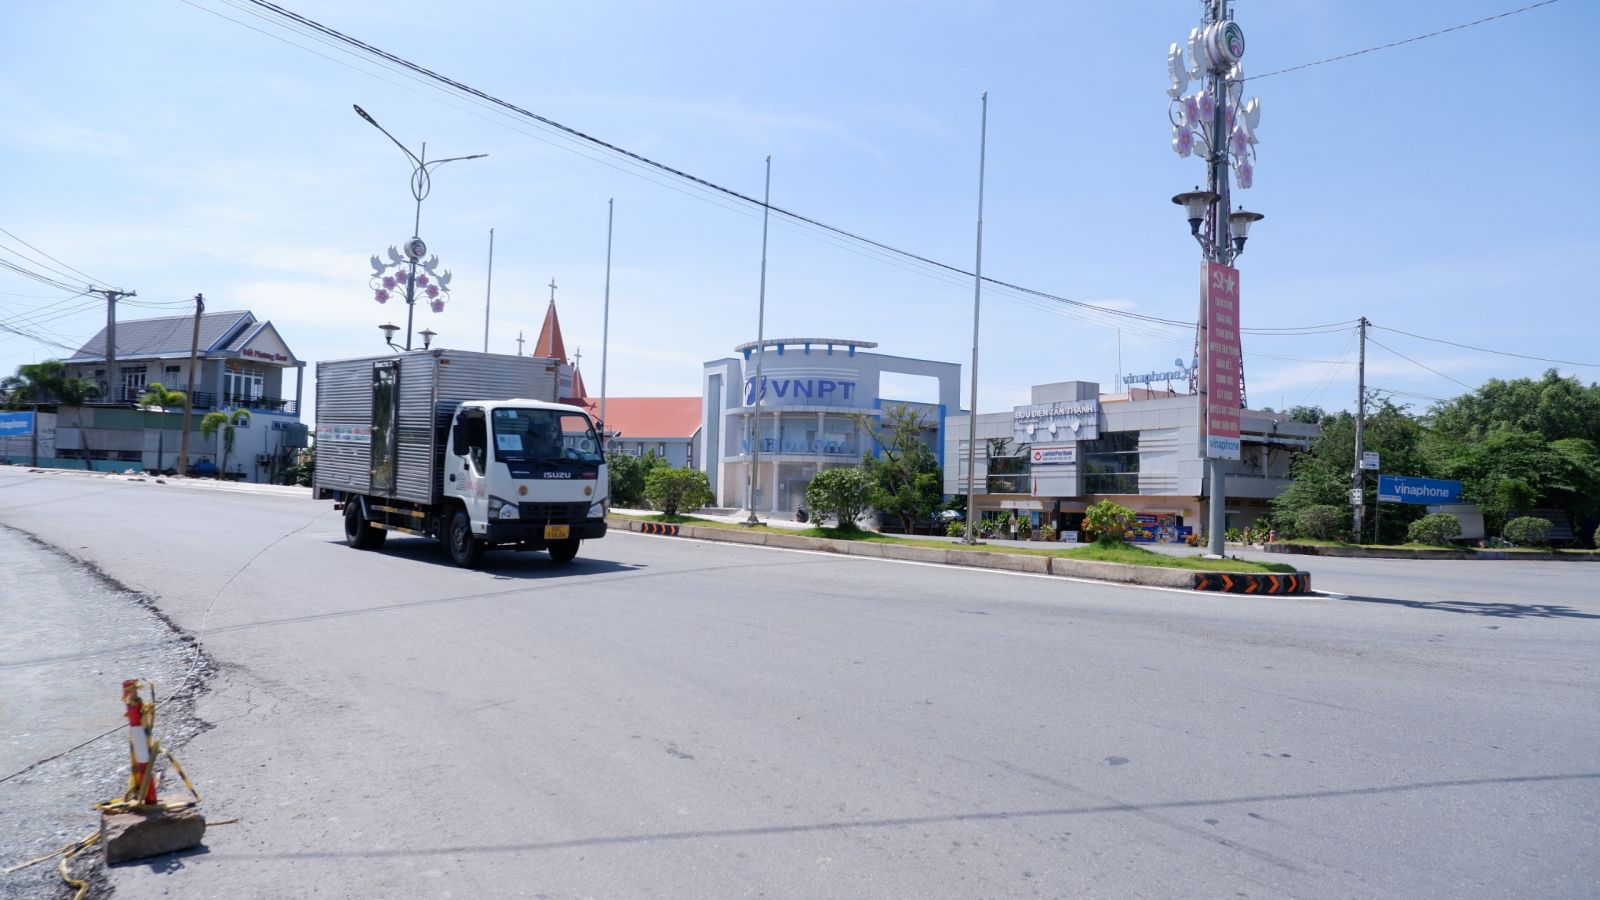 Tan Thanh is the gateway to the Dong Thap Muoi region and the western provinces, so it has many advantages in industrial, commercial and service development